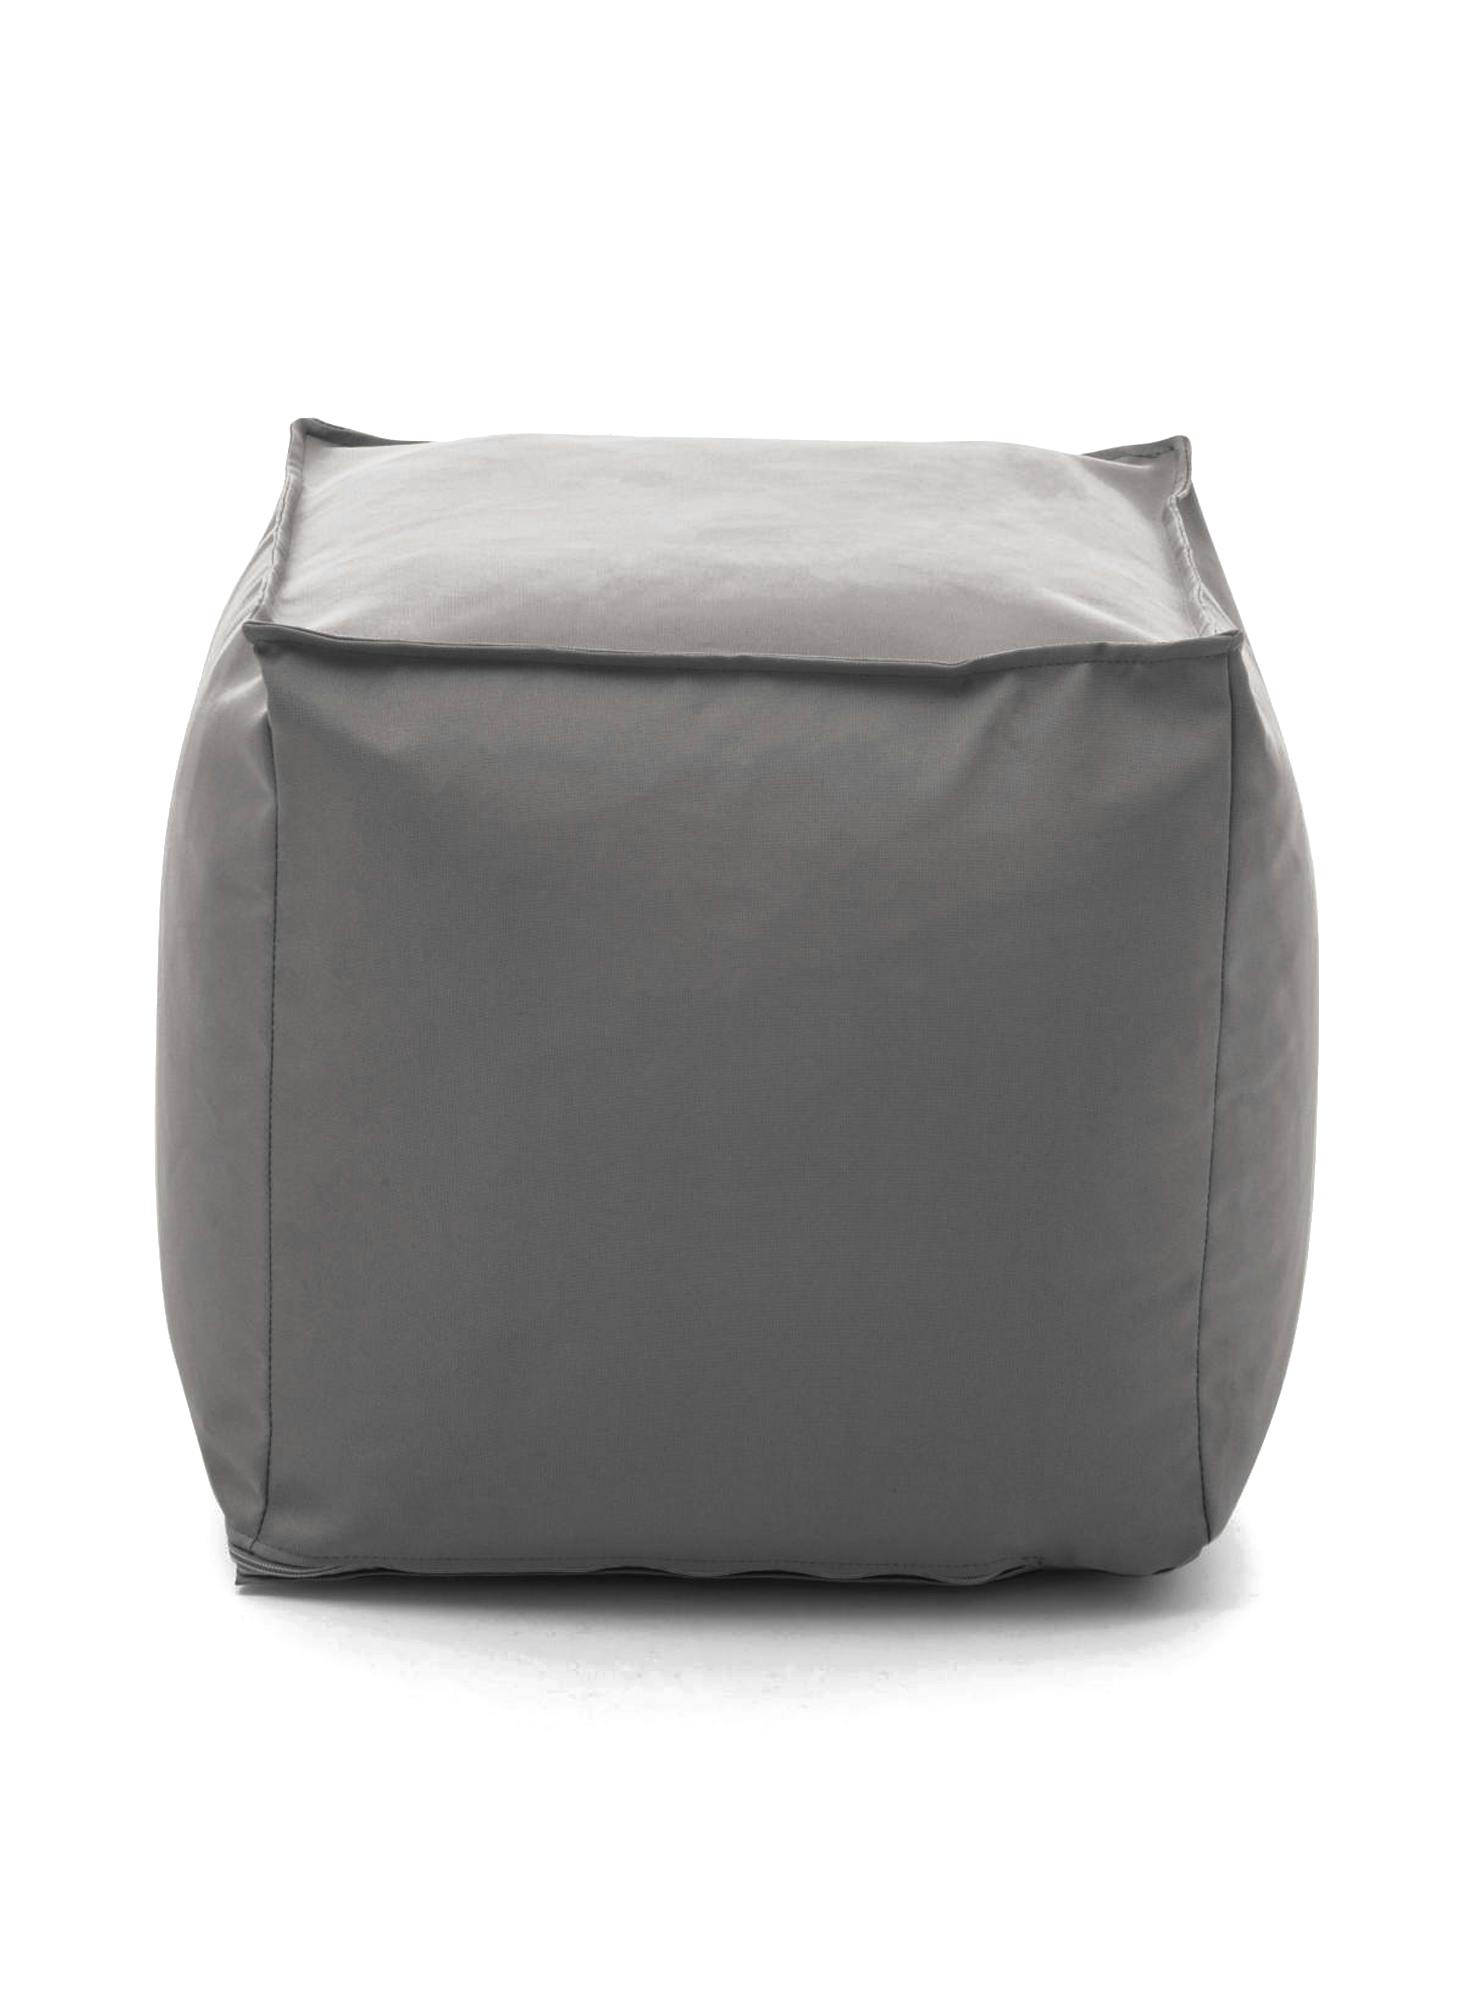 Pouf Sacco, 100% 100% Made in Italy, Poltrona a sacco in ecopelle, cm  70x70h110, colore Bianco